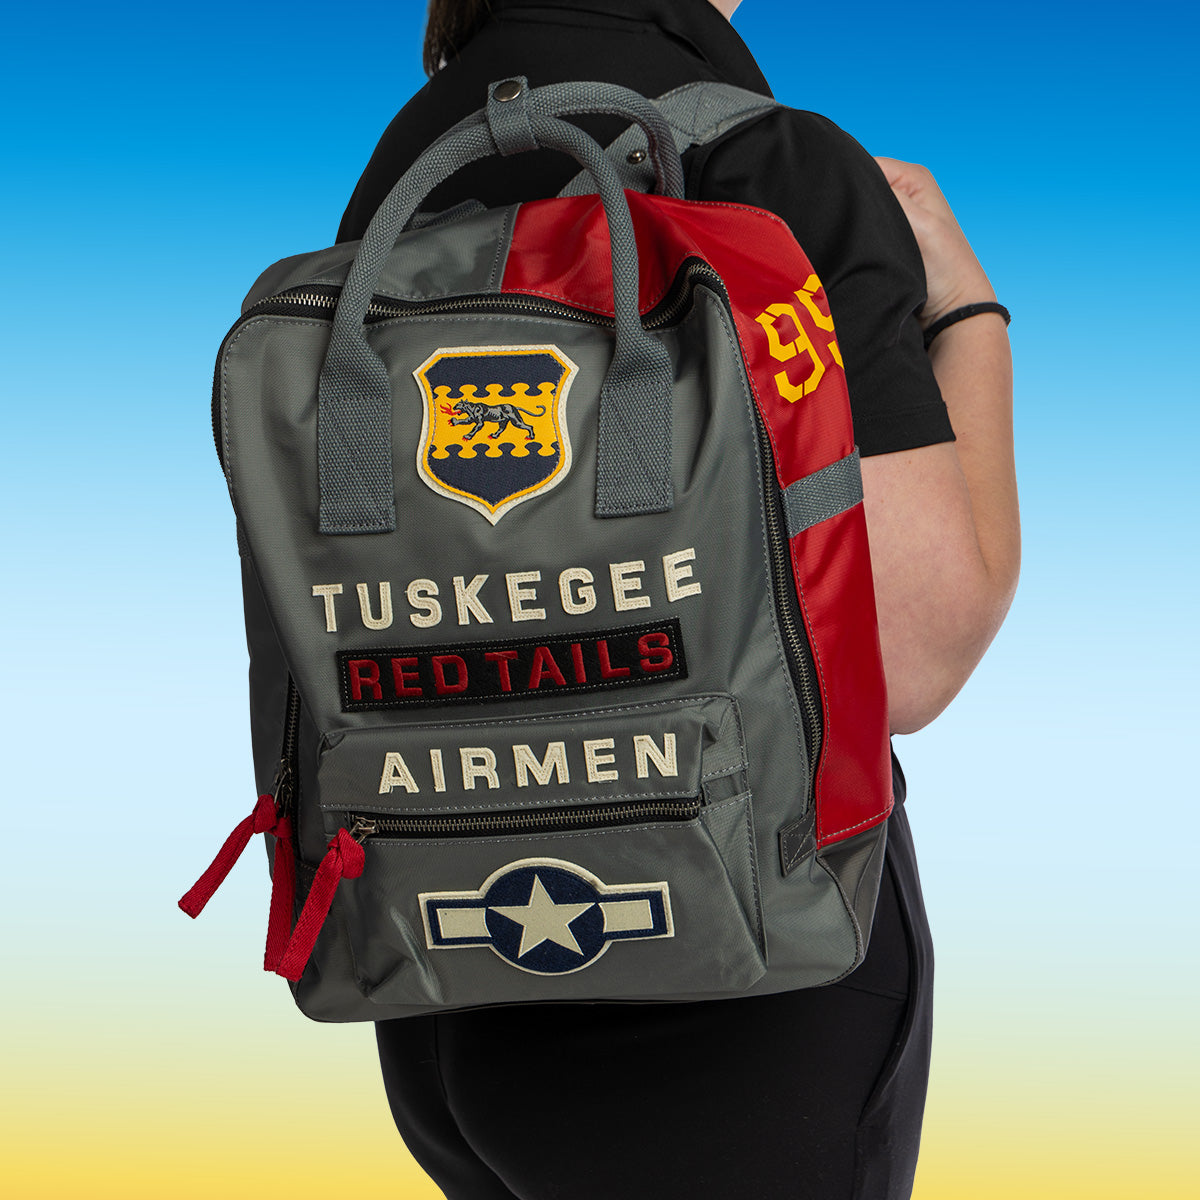 Lifestyle of Boeing Tuskegee Backpack on Small Mosaic Tile in Fan Favorites